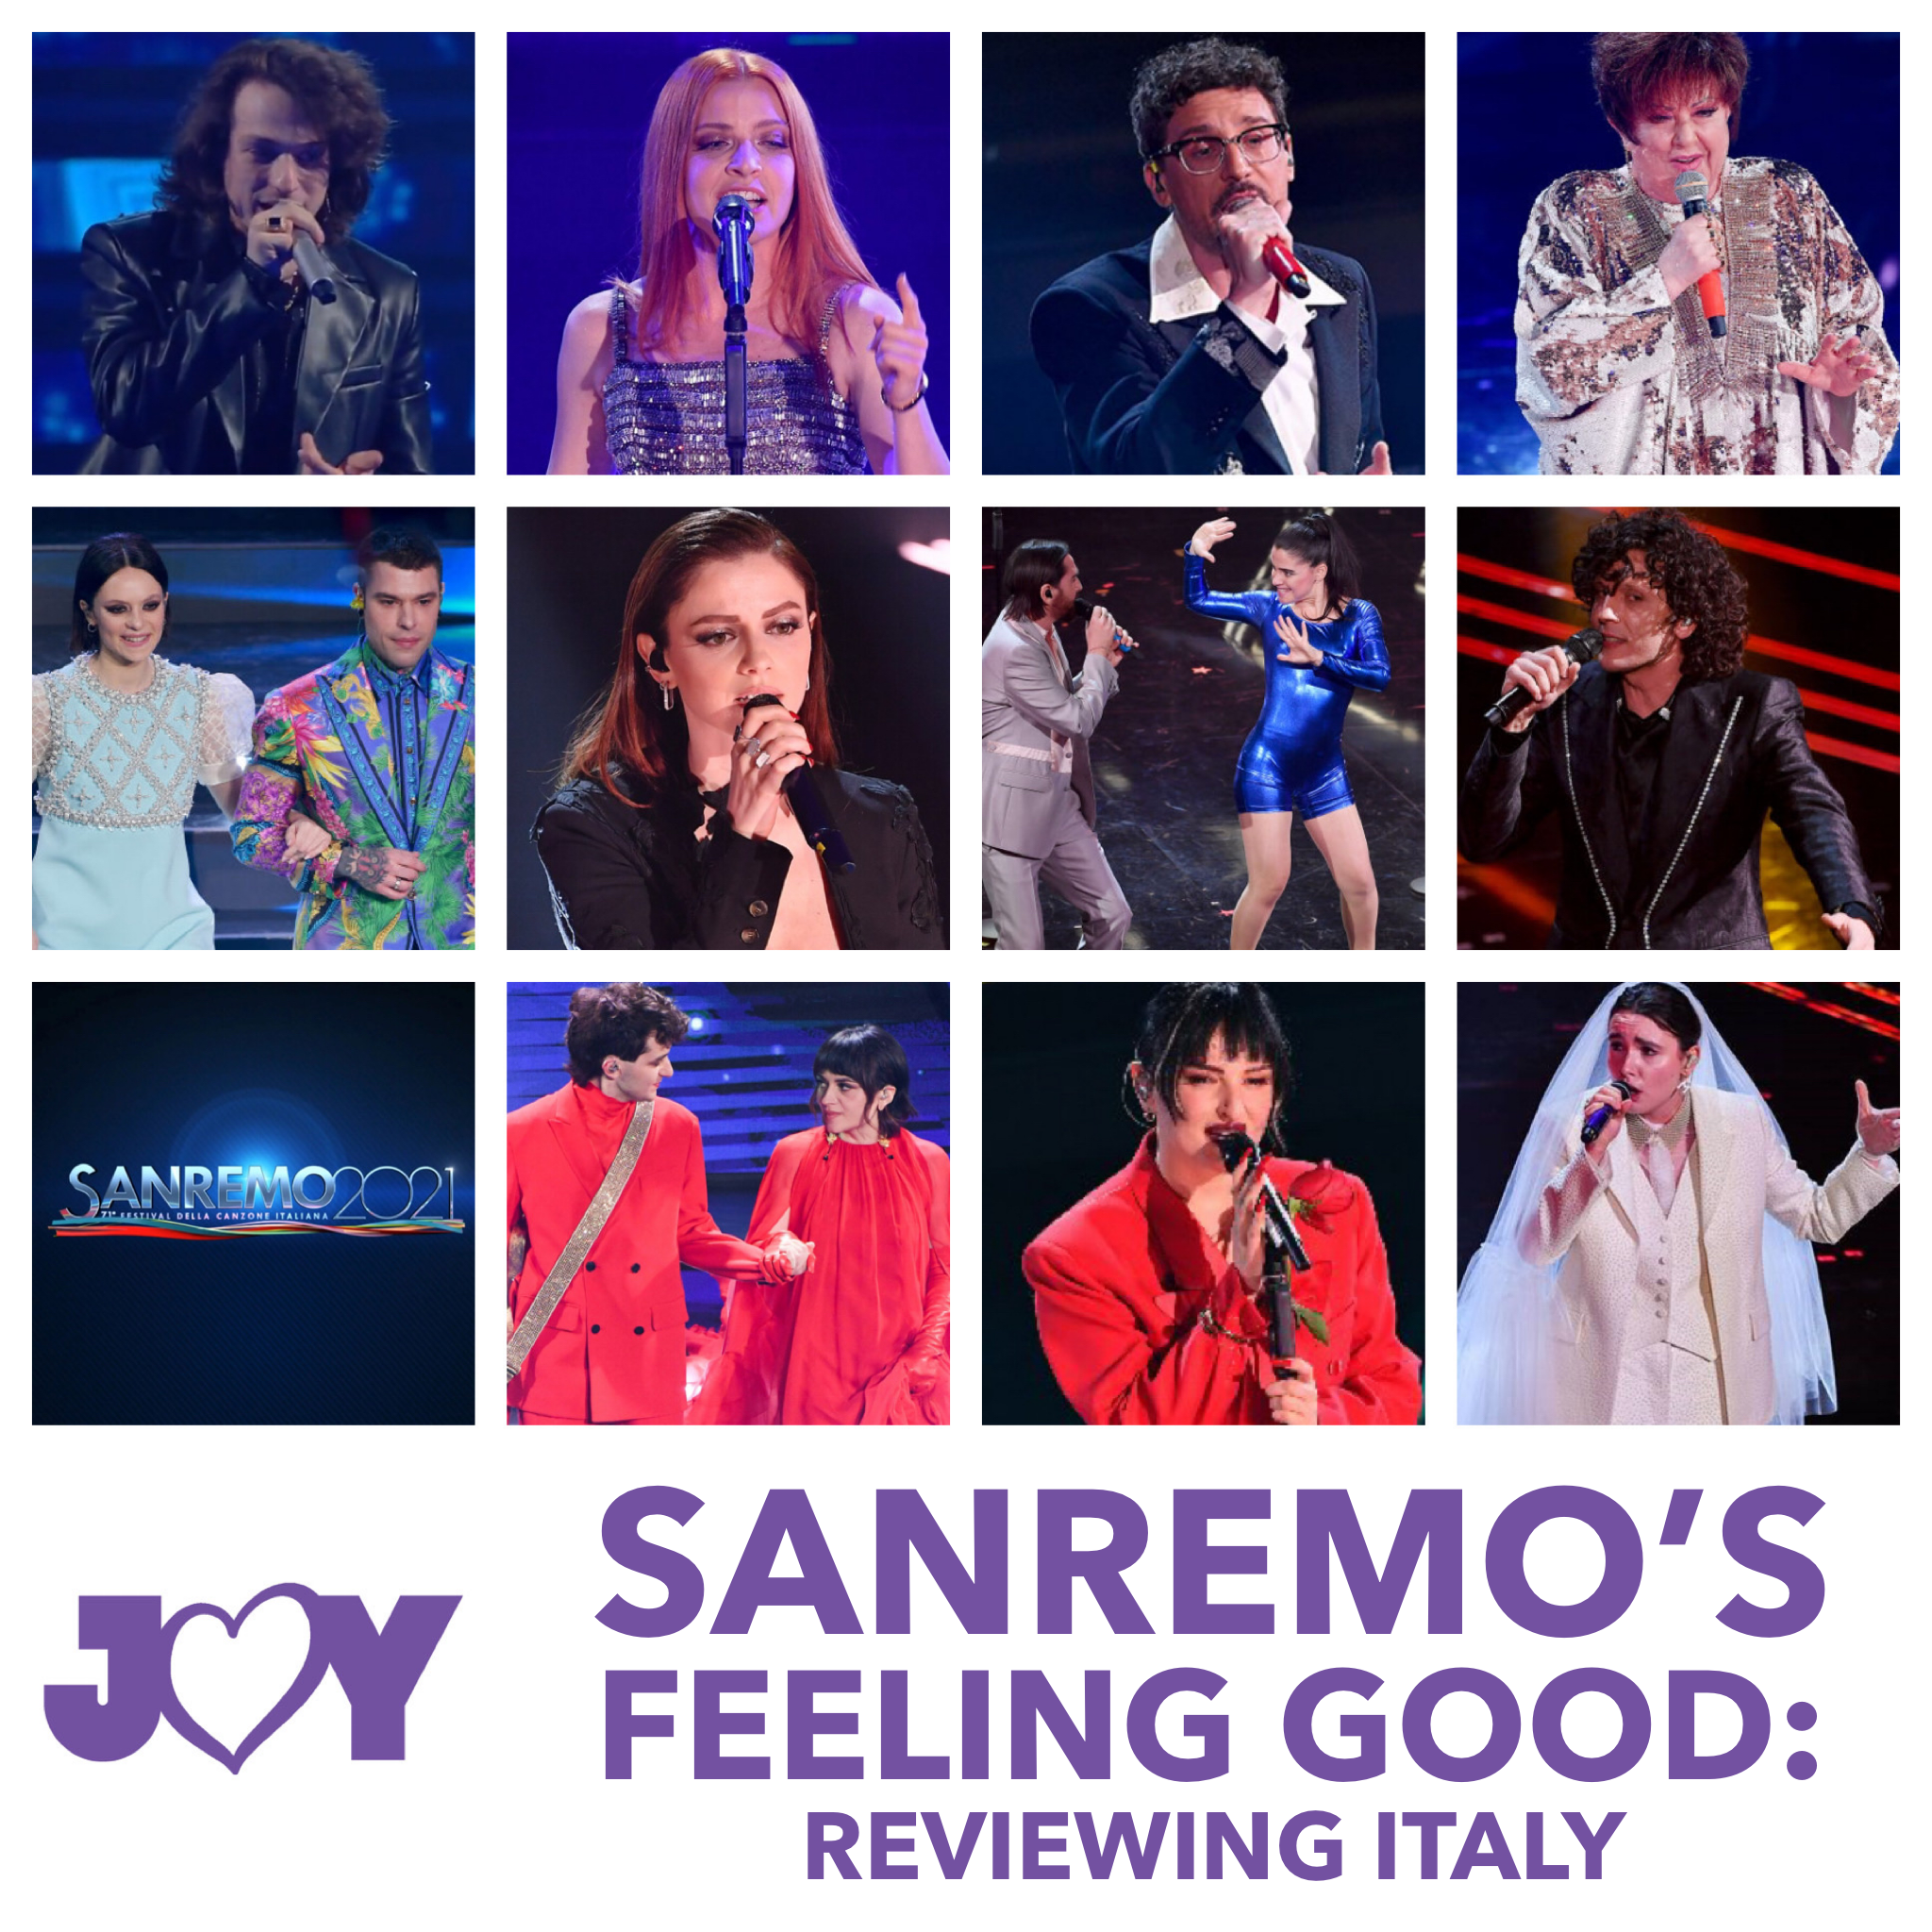 🇮🇹 Italy’s feeling good: Reviewing Sanremo 2021